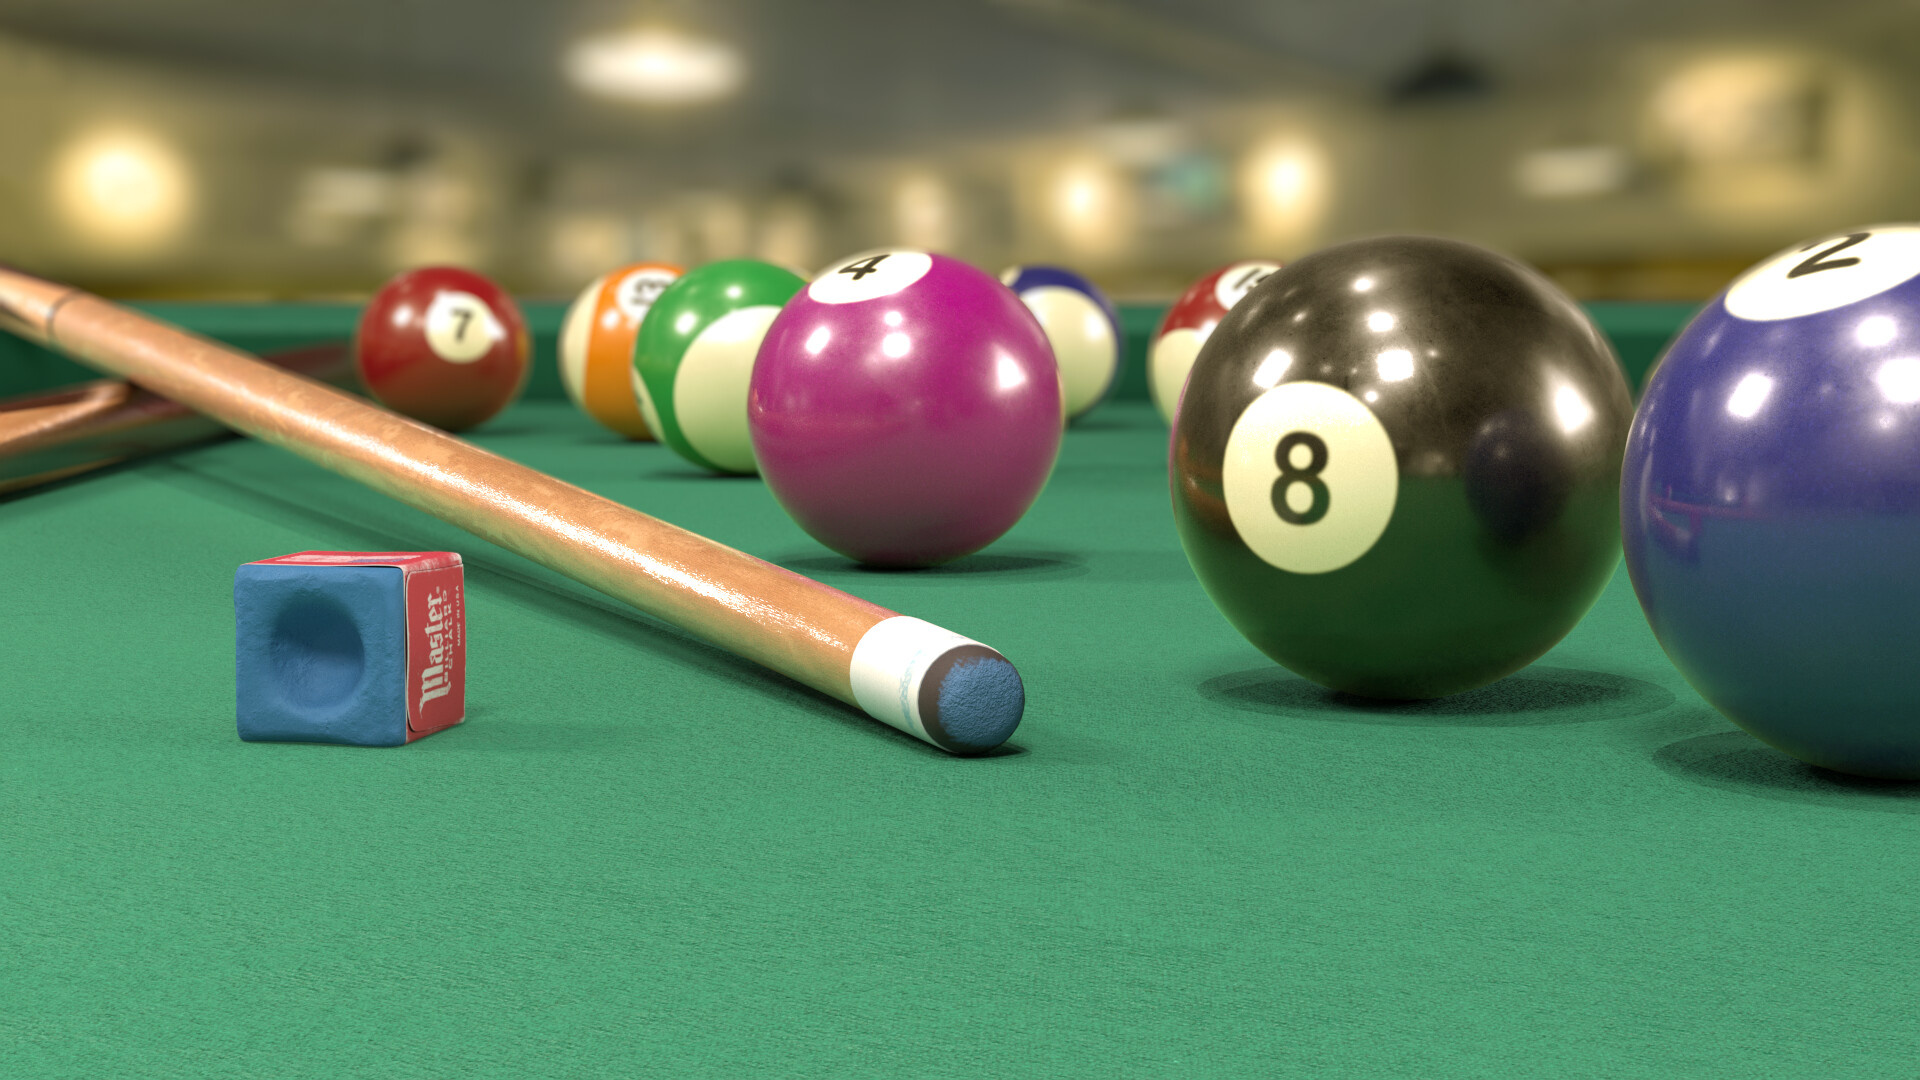 Billiards: Straight pool, Cue stick, object balls and cue chalk that lets the player add friction to the cue tip. 1920x1080 Full HD Background.